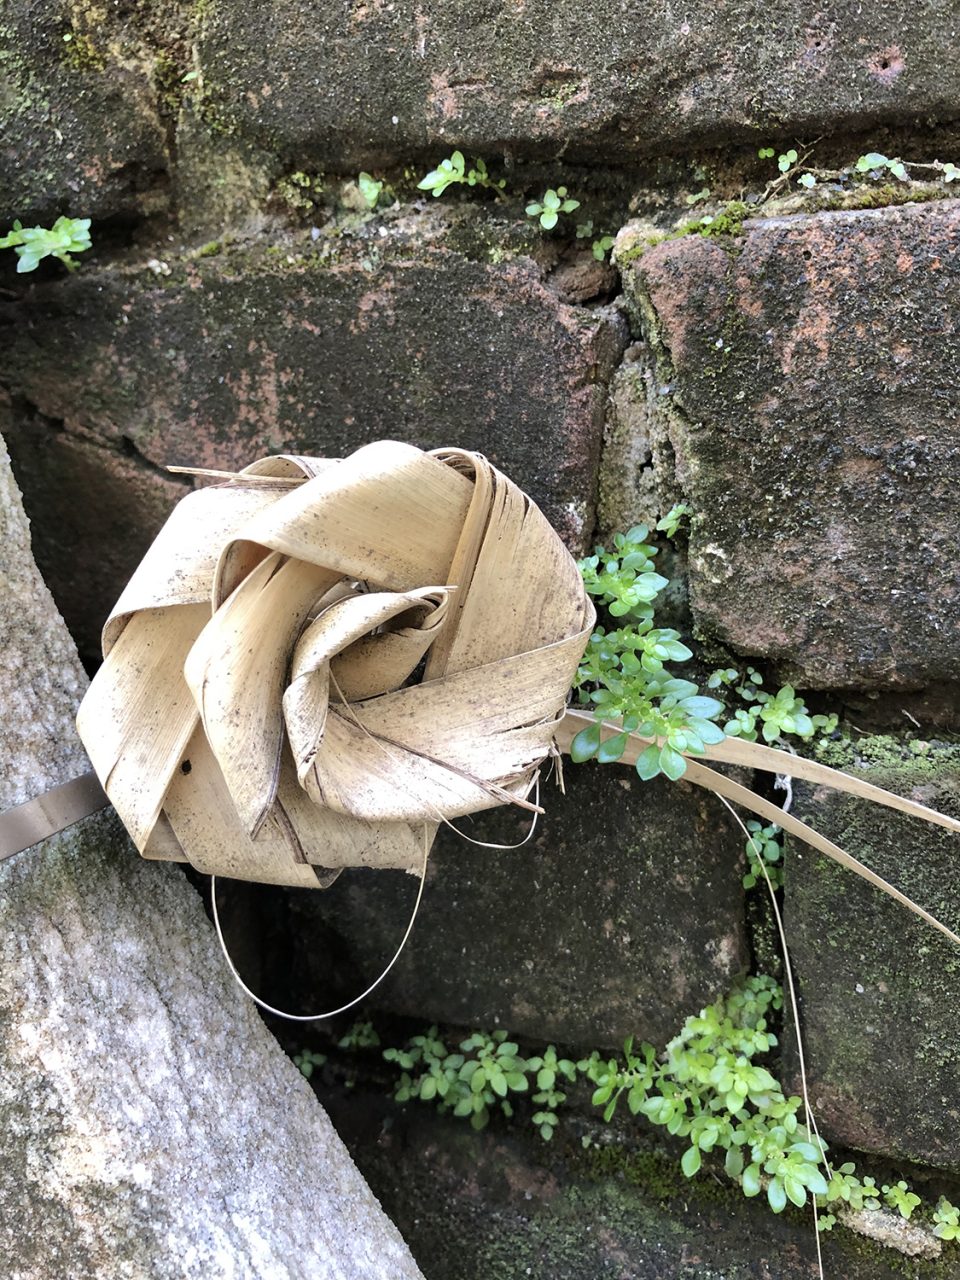 A flower made of sweetgrass, which refers to the local craft of making sweetgrass baskets, a tradition of the Gullah Geechee community of the low country.